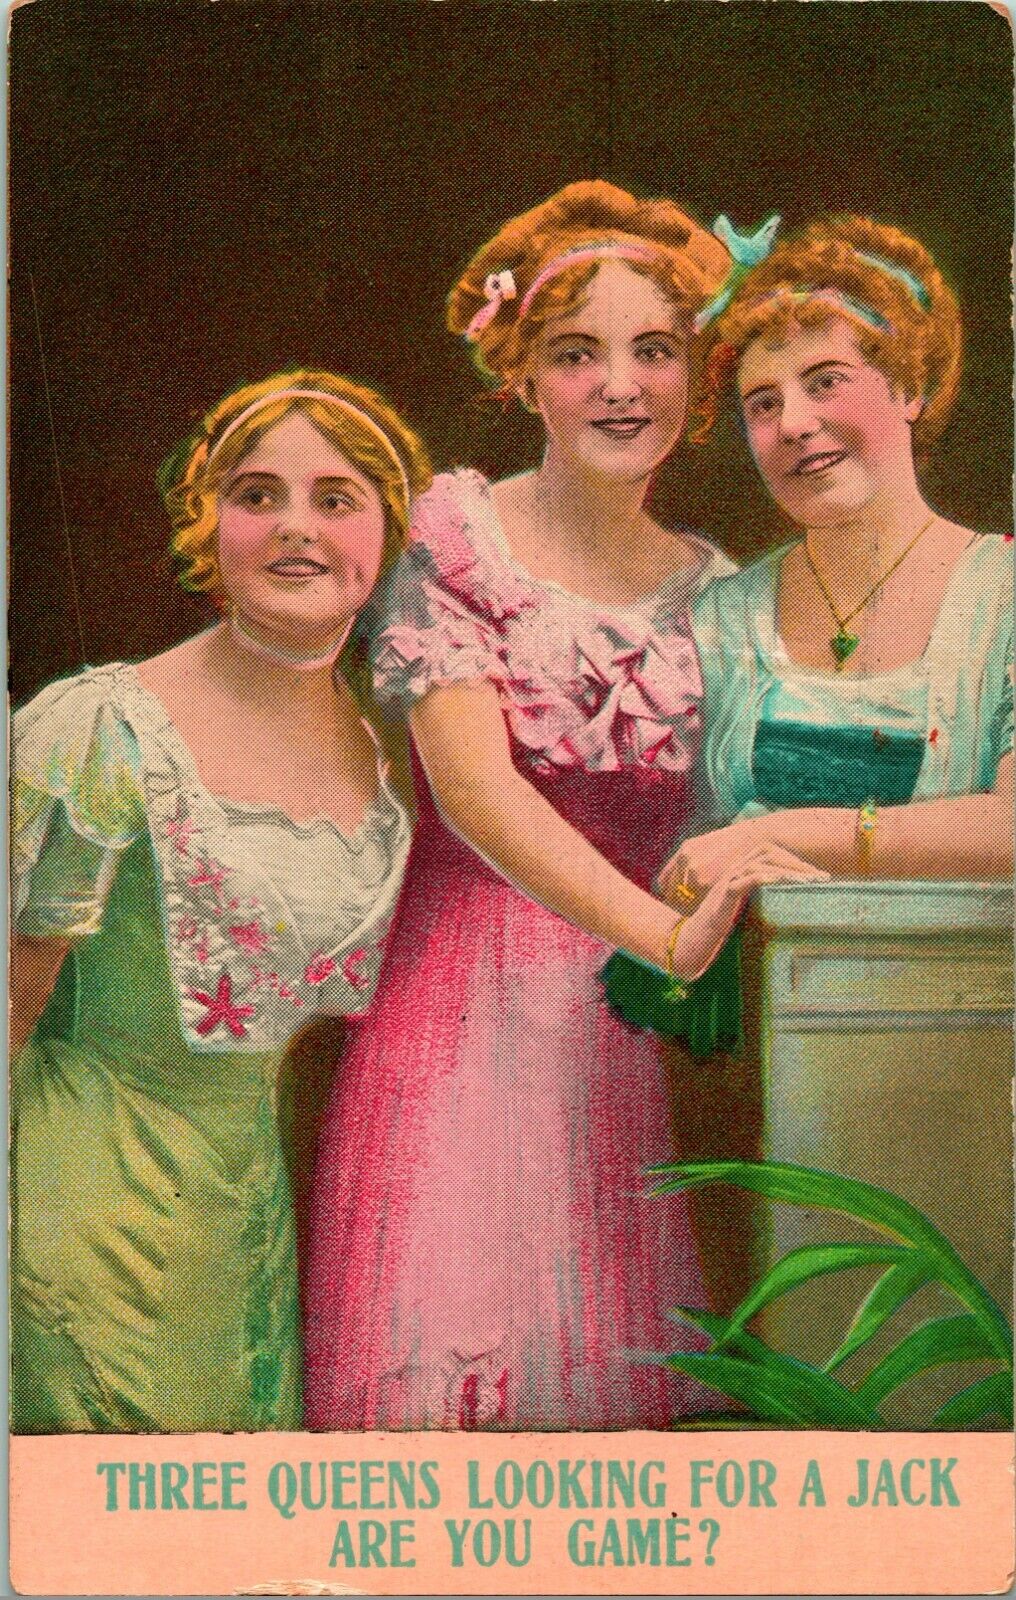 Vtg Postcard 1910s - Three Queens Looking for a Jack Dressed Up Victorian Girls